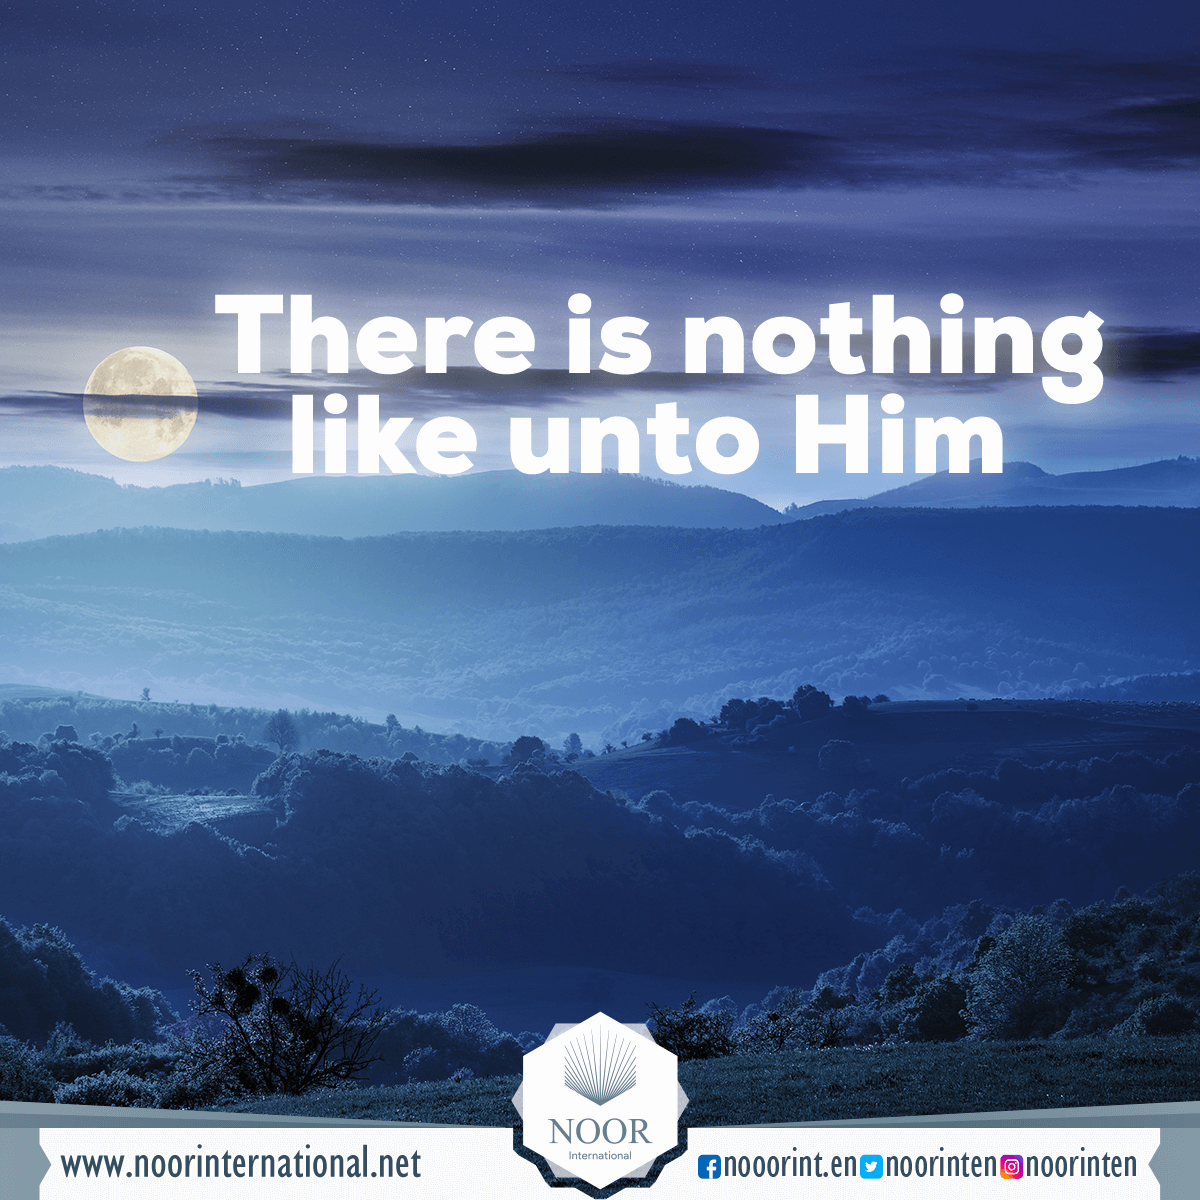 There is nothing like unto Him